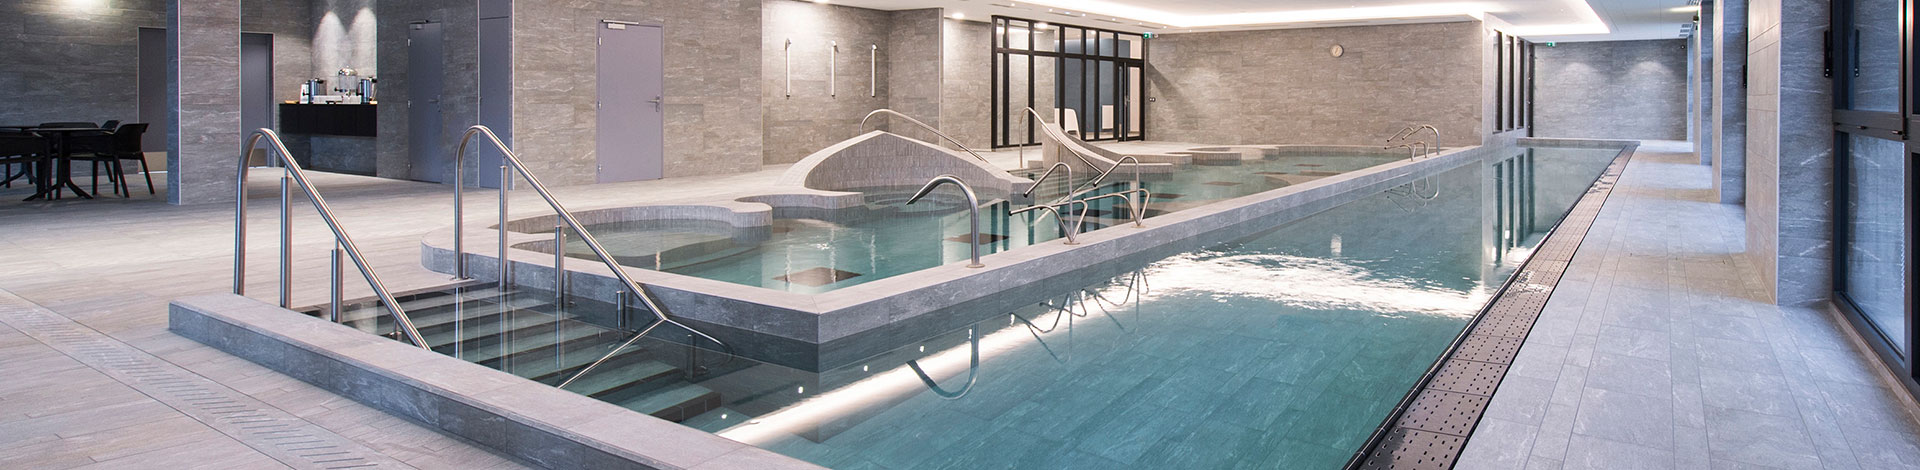 Grand Spa Thermal in Brides-les-Bains